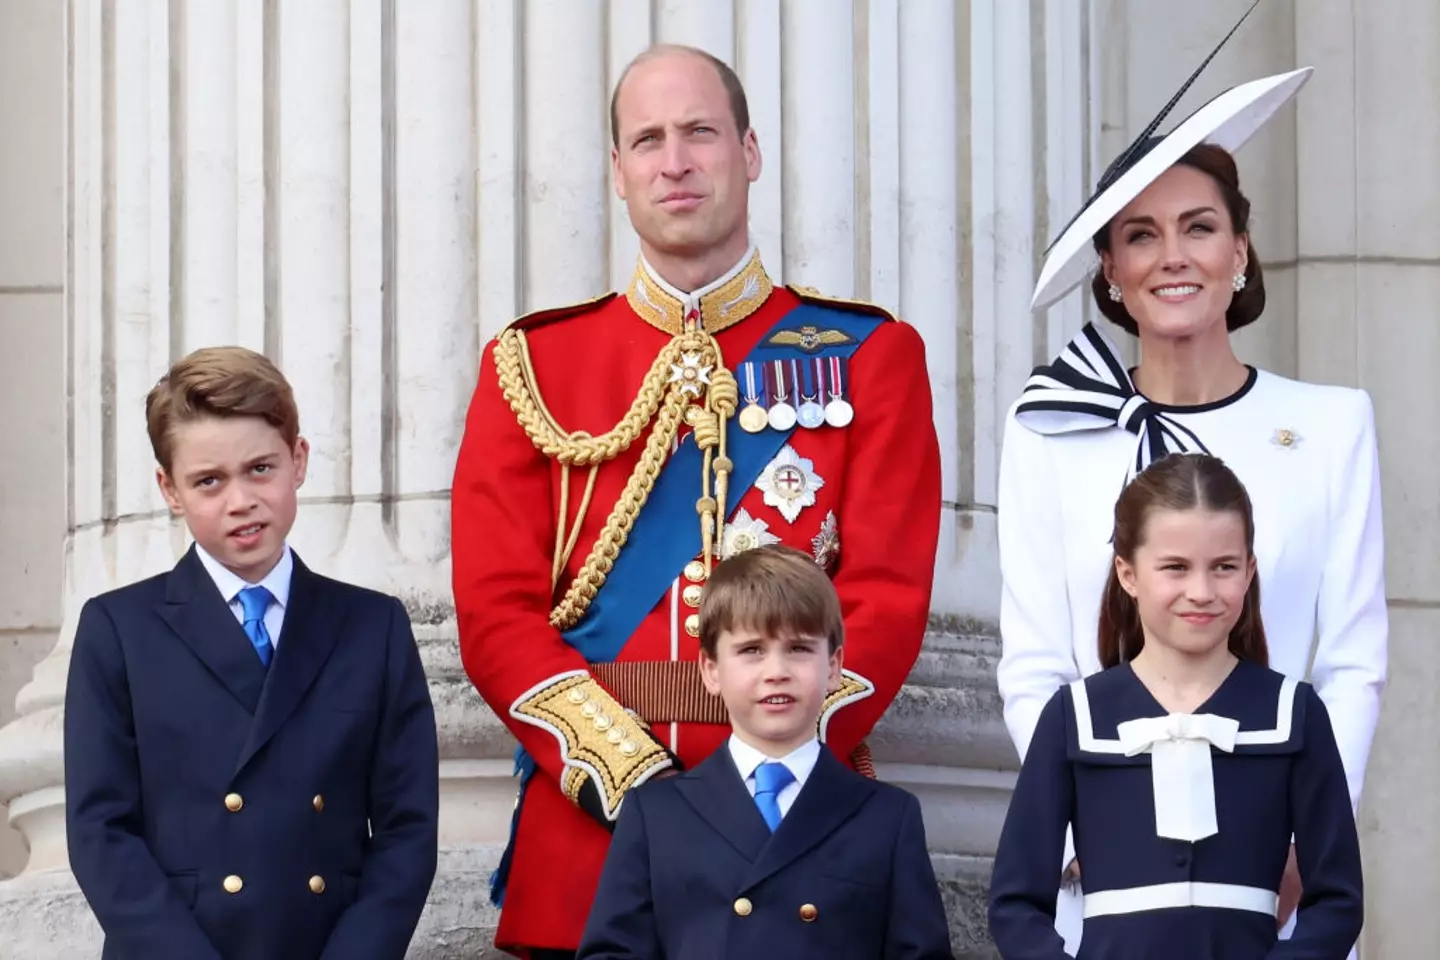 Kate Middleton attended the Trooping the Colour parade. (Chris Jackson/Getty Images)